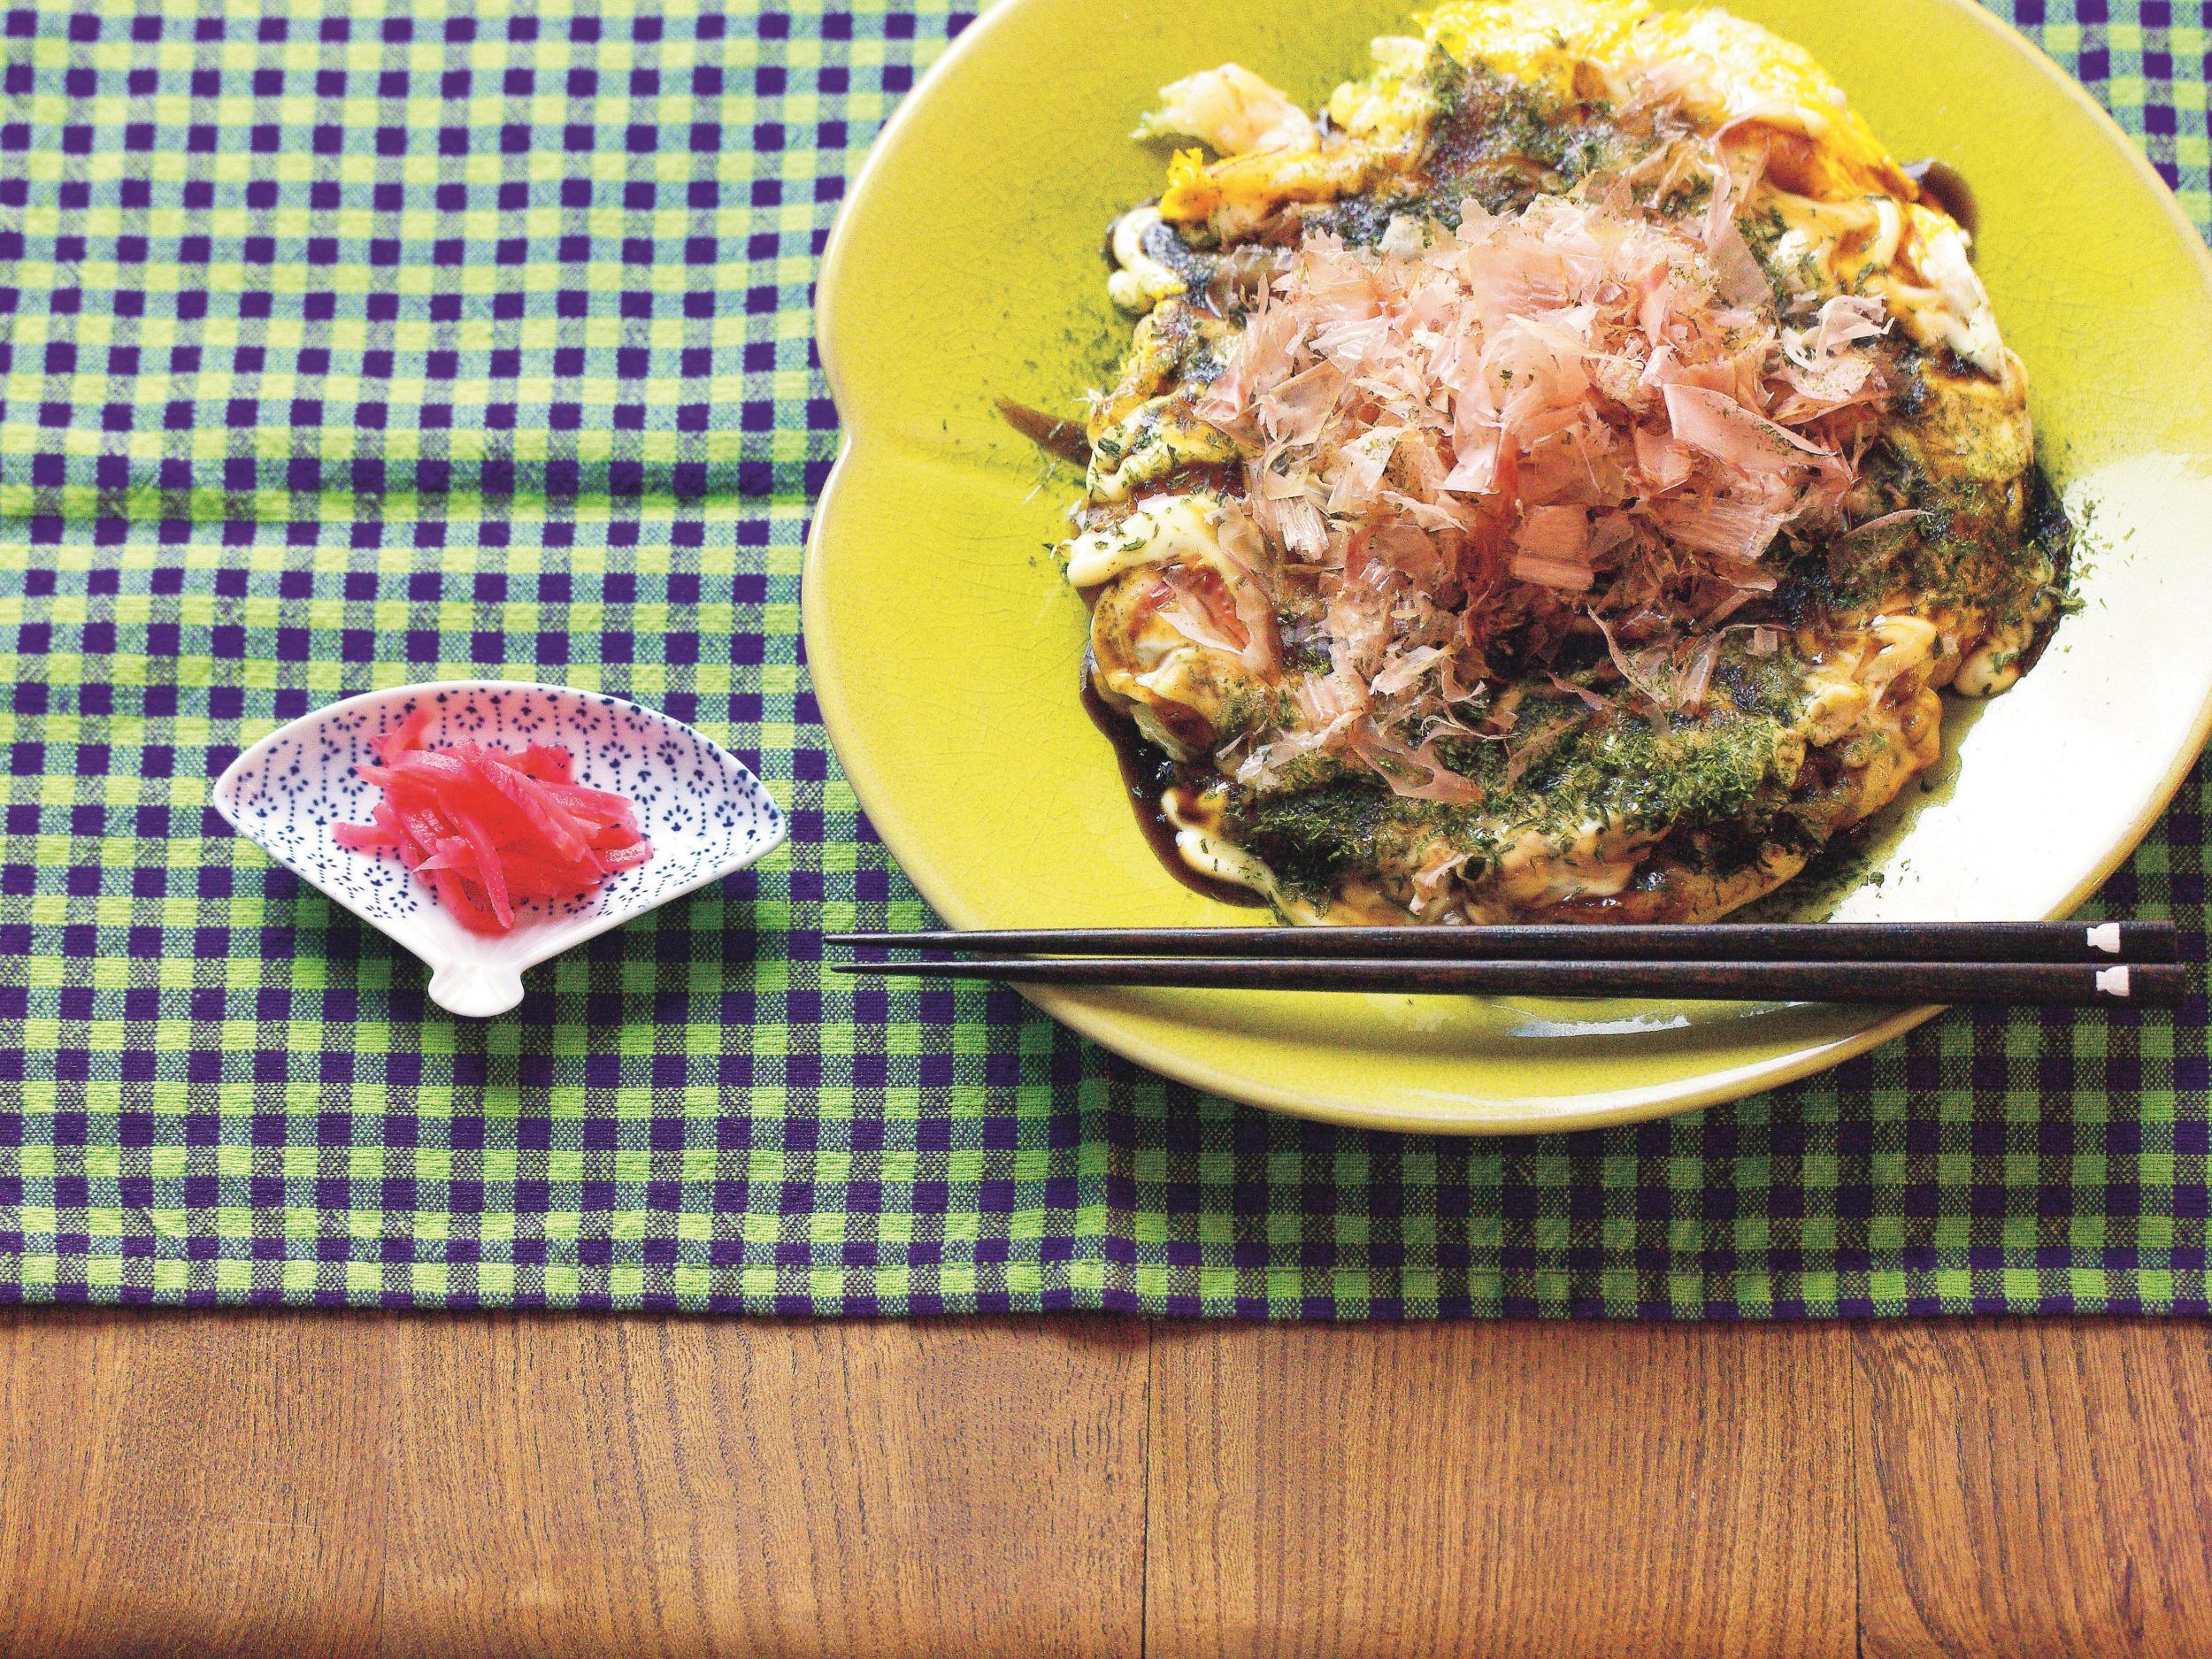 The beauty of okonomiyaki (above) is you can use any ingredients you want